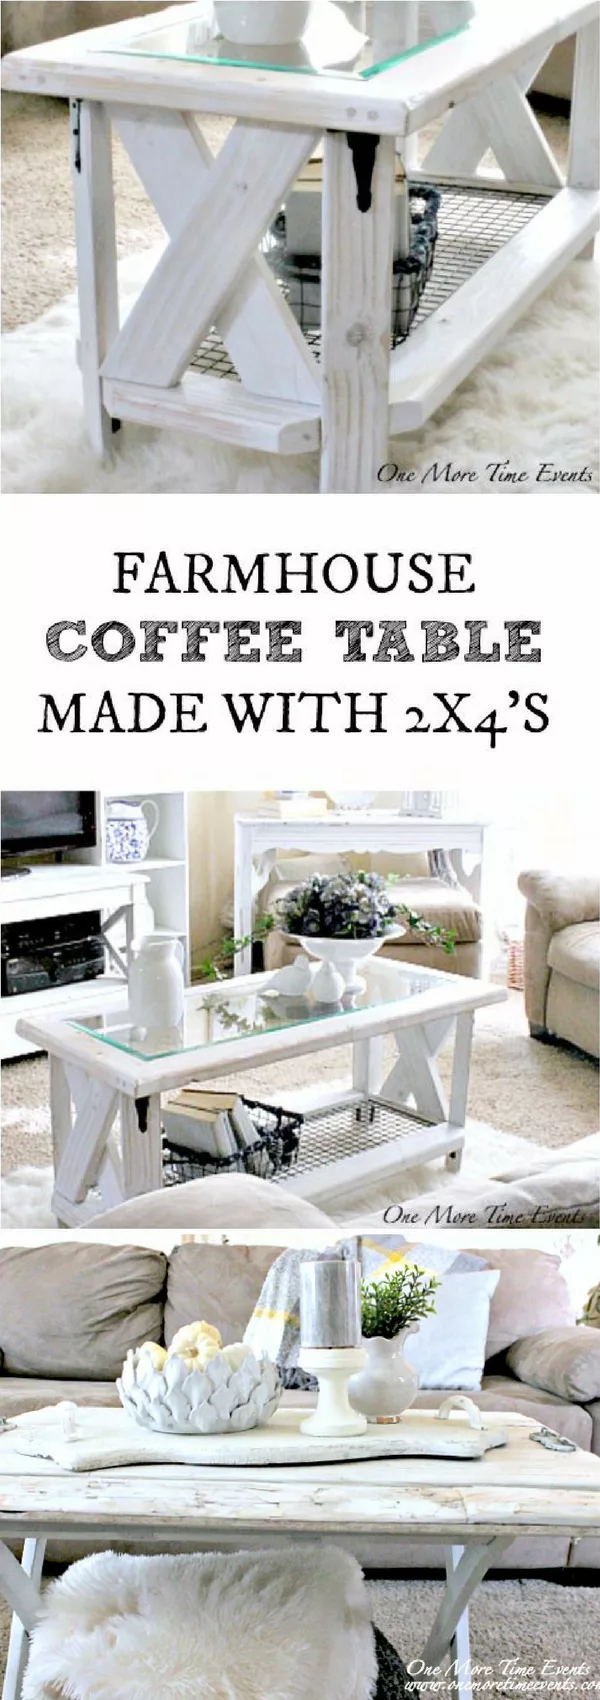 20 Crafty 2x4 DIY Projects That You Can Easily Make - Check out how to make a DIY farmhouse coffee table from 2x4s